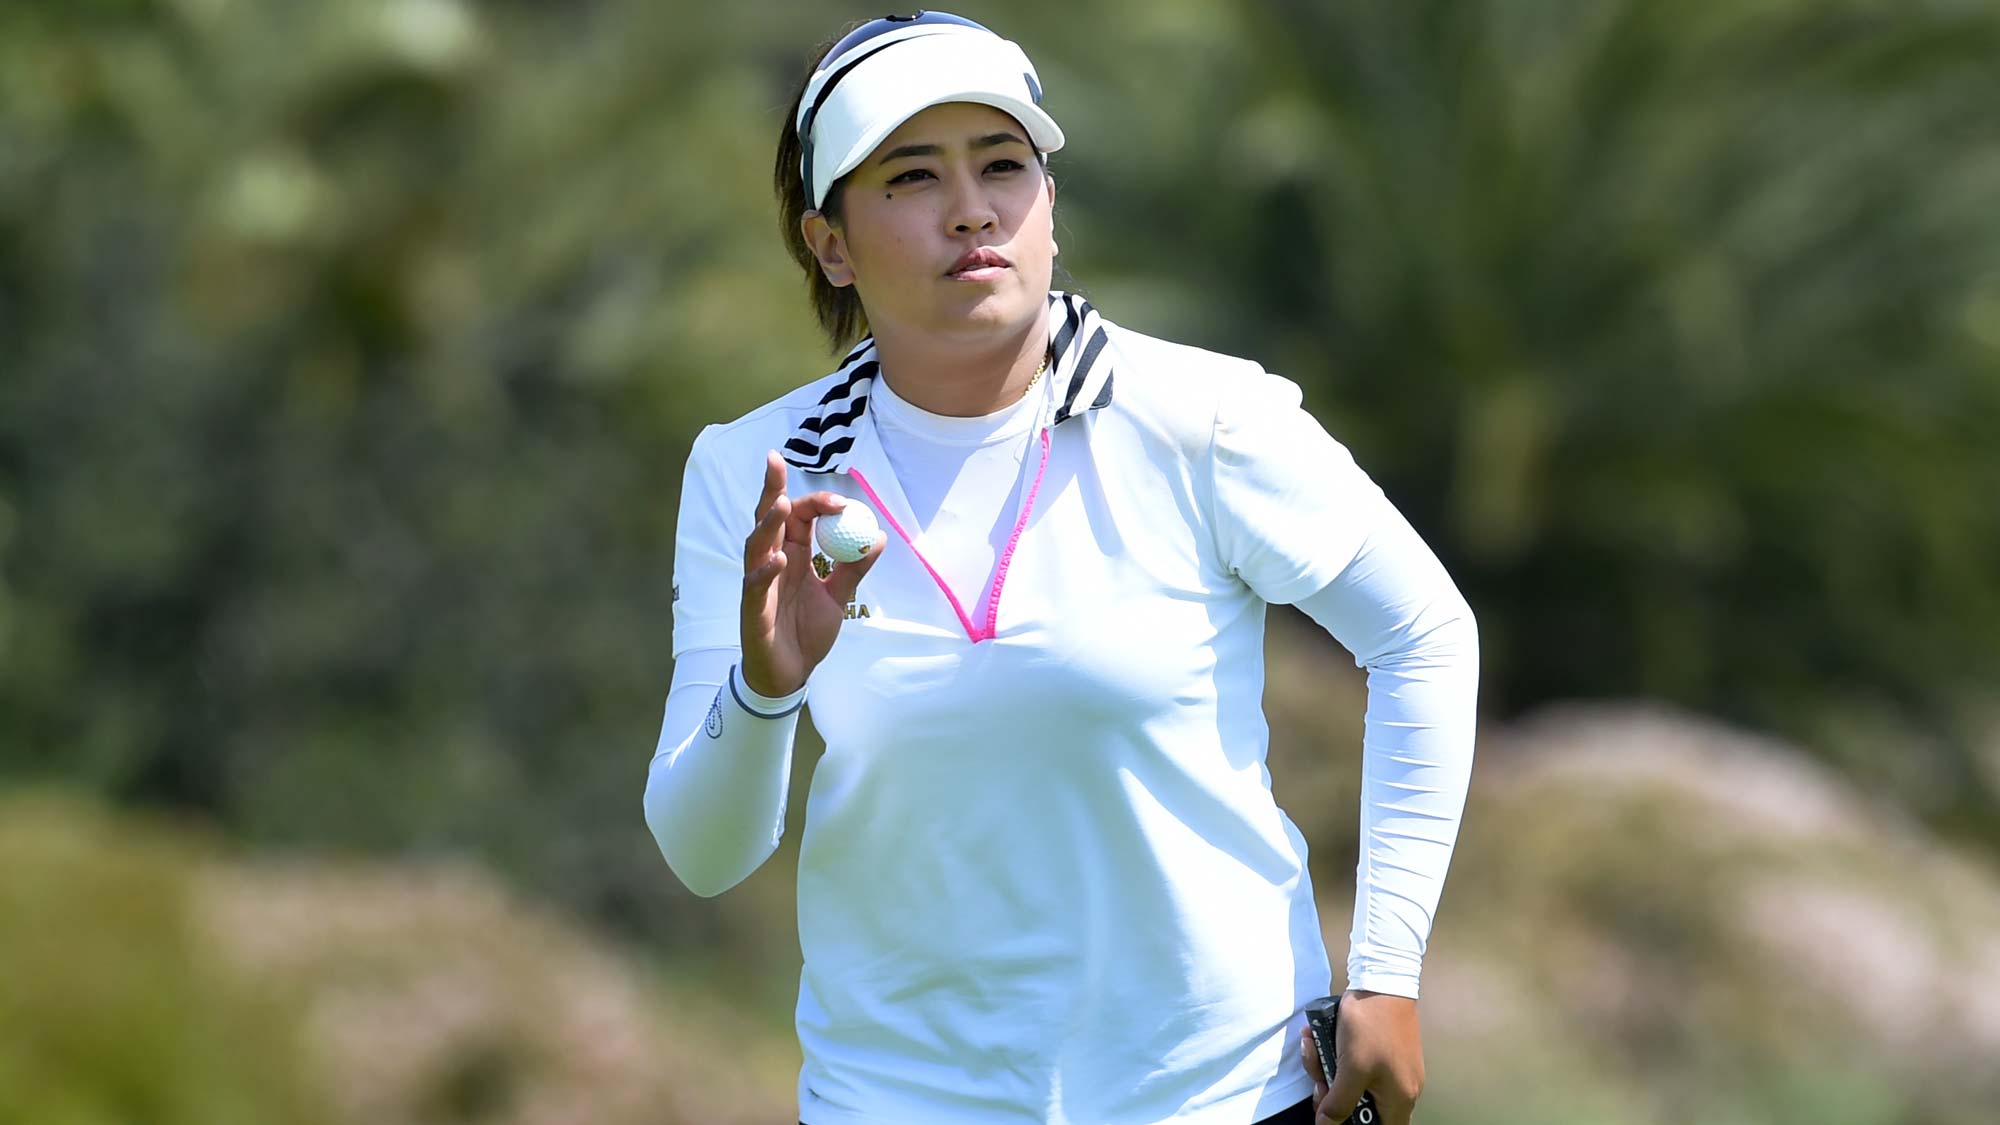 Thidapa Suwannapura of Thailand acknowledges the gallery after sinking a putt during the second round of the Kia Classic